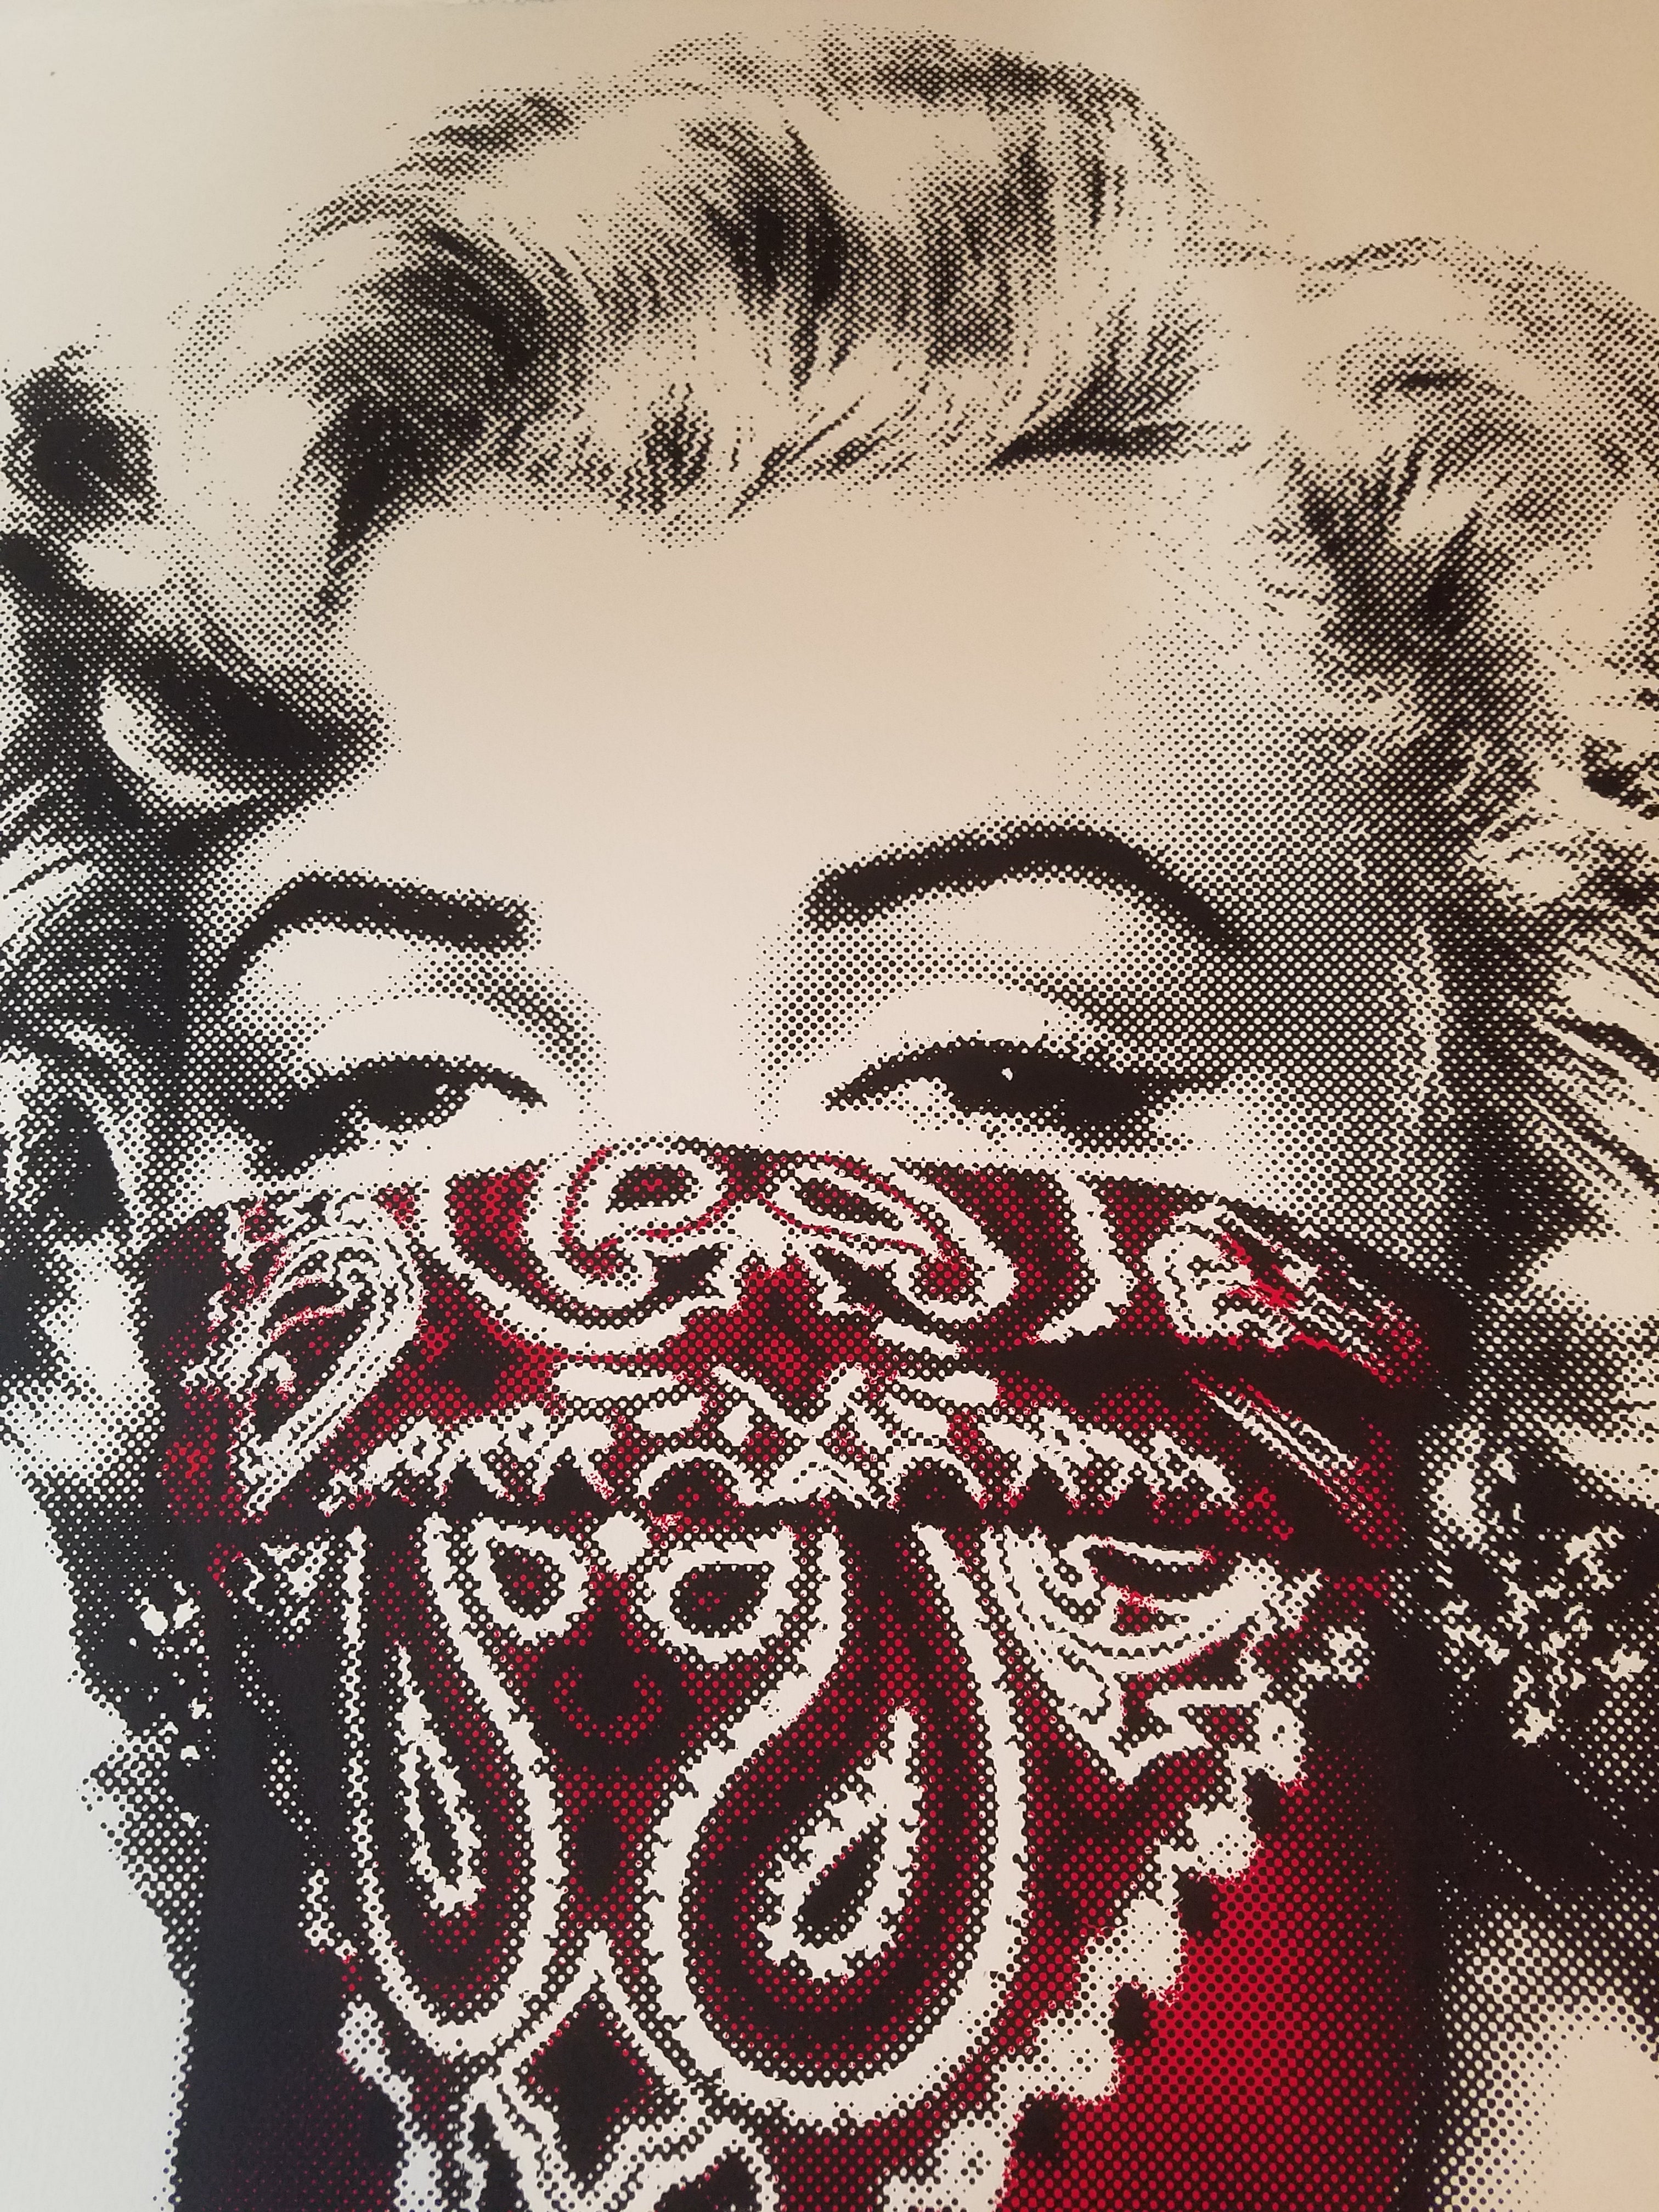 Title:  STAY SAFE RED  Artist:  Mr. Brainwash  Edition:  xx/50  Type:  Two-color screen-print on archival paper  Size:  22" x 22"  Notes:  Limited Edition of 50 Print on paper. In celebration of Marilyn Monroe’s birthday on June 1st, we will be releasing Stay Safe, a new limited edition screen print. Each two-color screen print is hand-torn, signed, and numbered with a thumbprint on the back.  Check out our other listings for more hard-to-find and out-of-print posters.